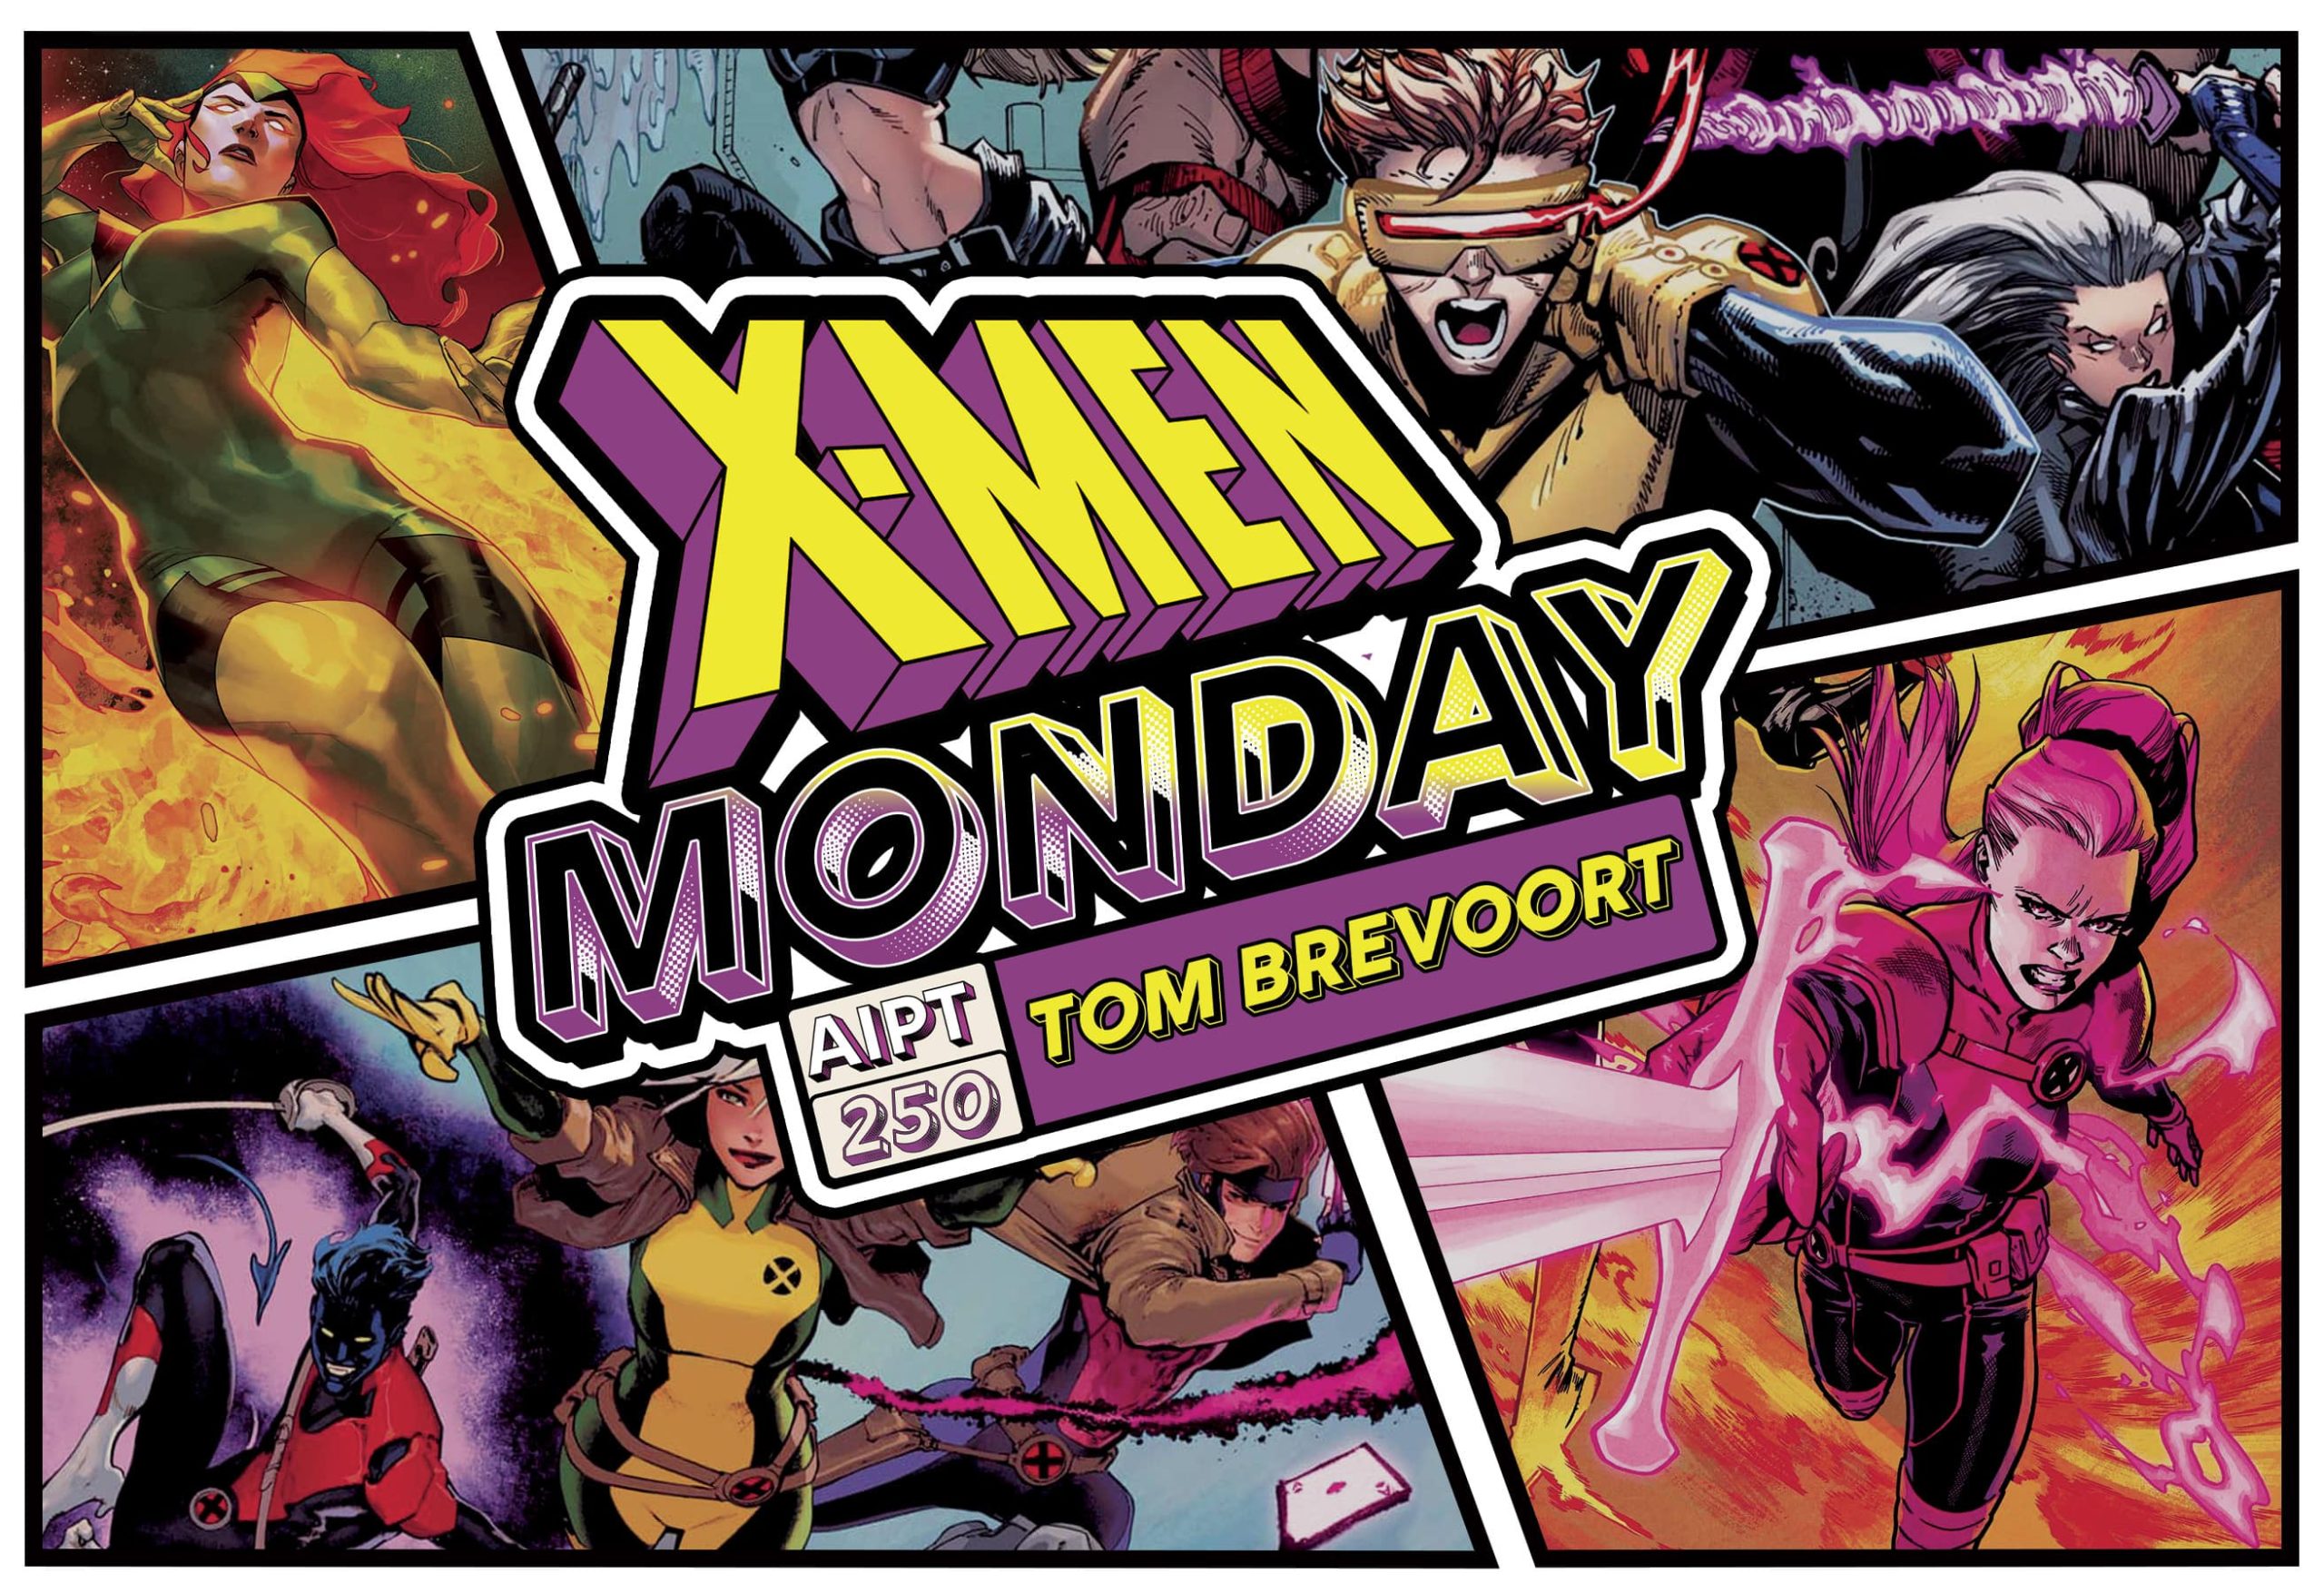 X-Men Monday #250 - 'From the Ashes' Era Preview With Tom Brevoort